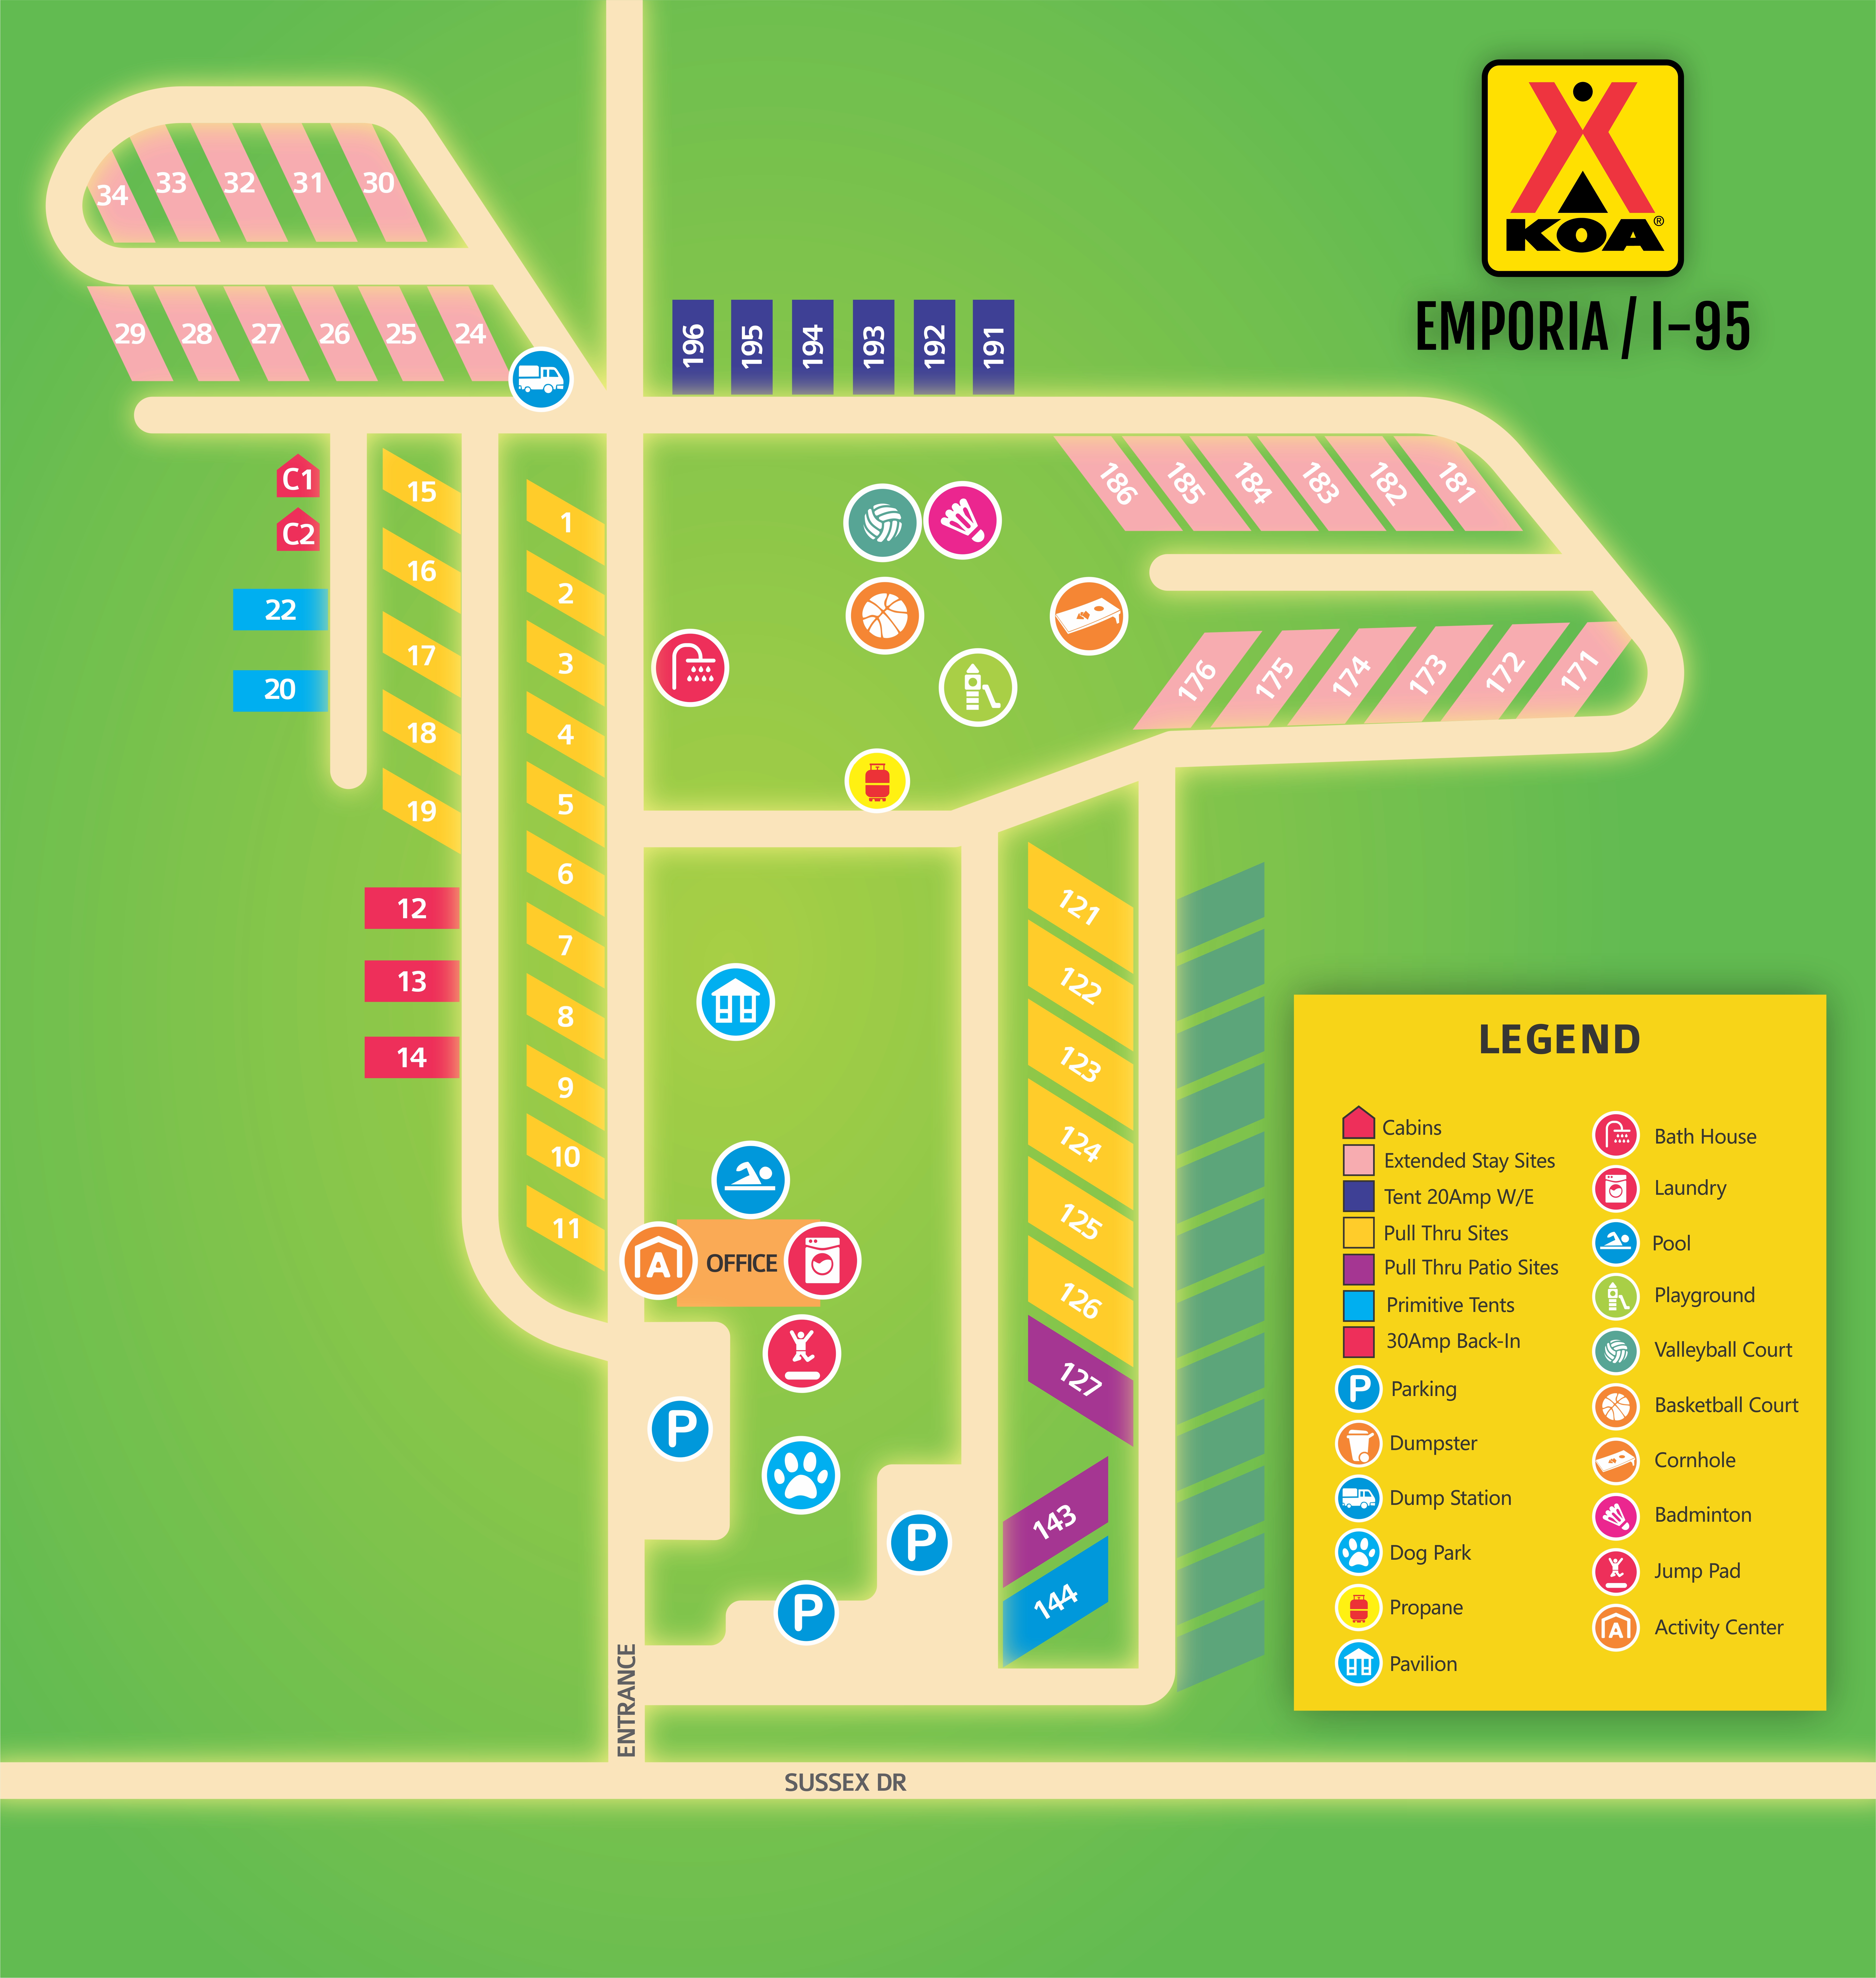 Campground Site Map